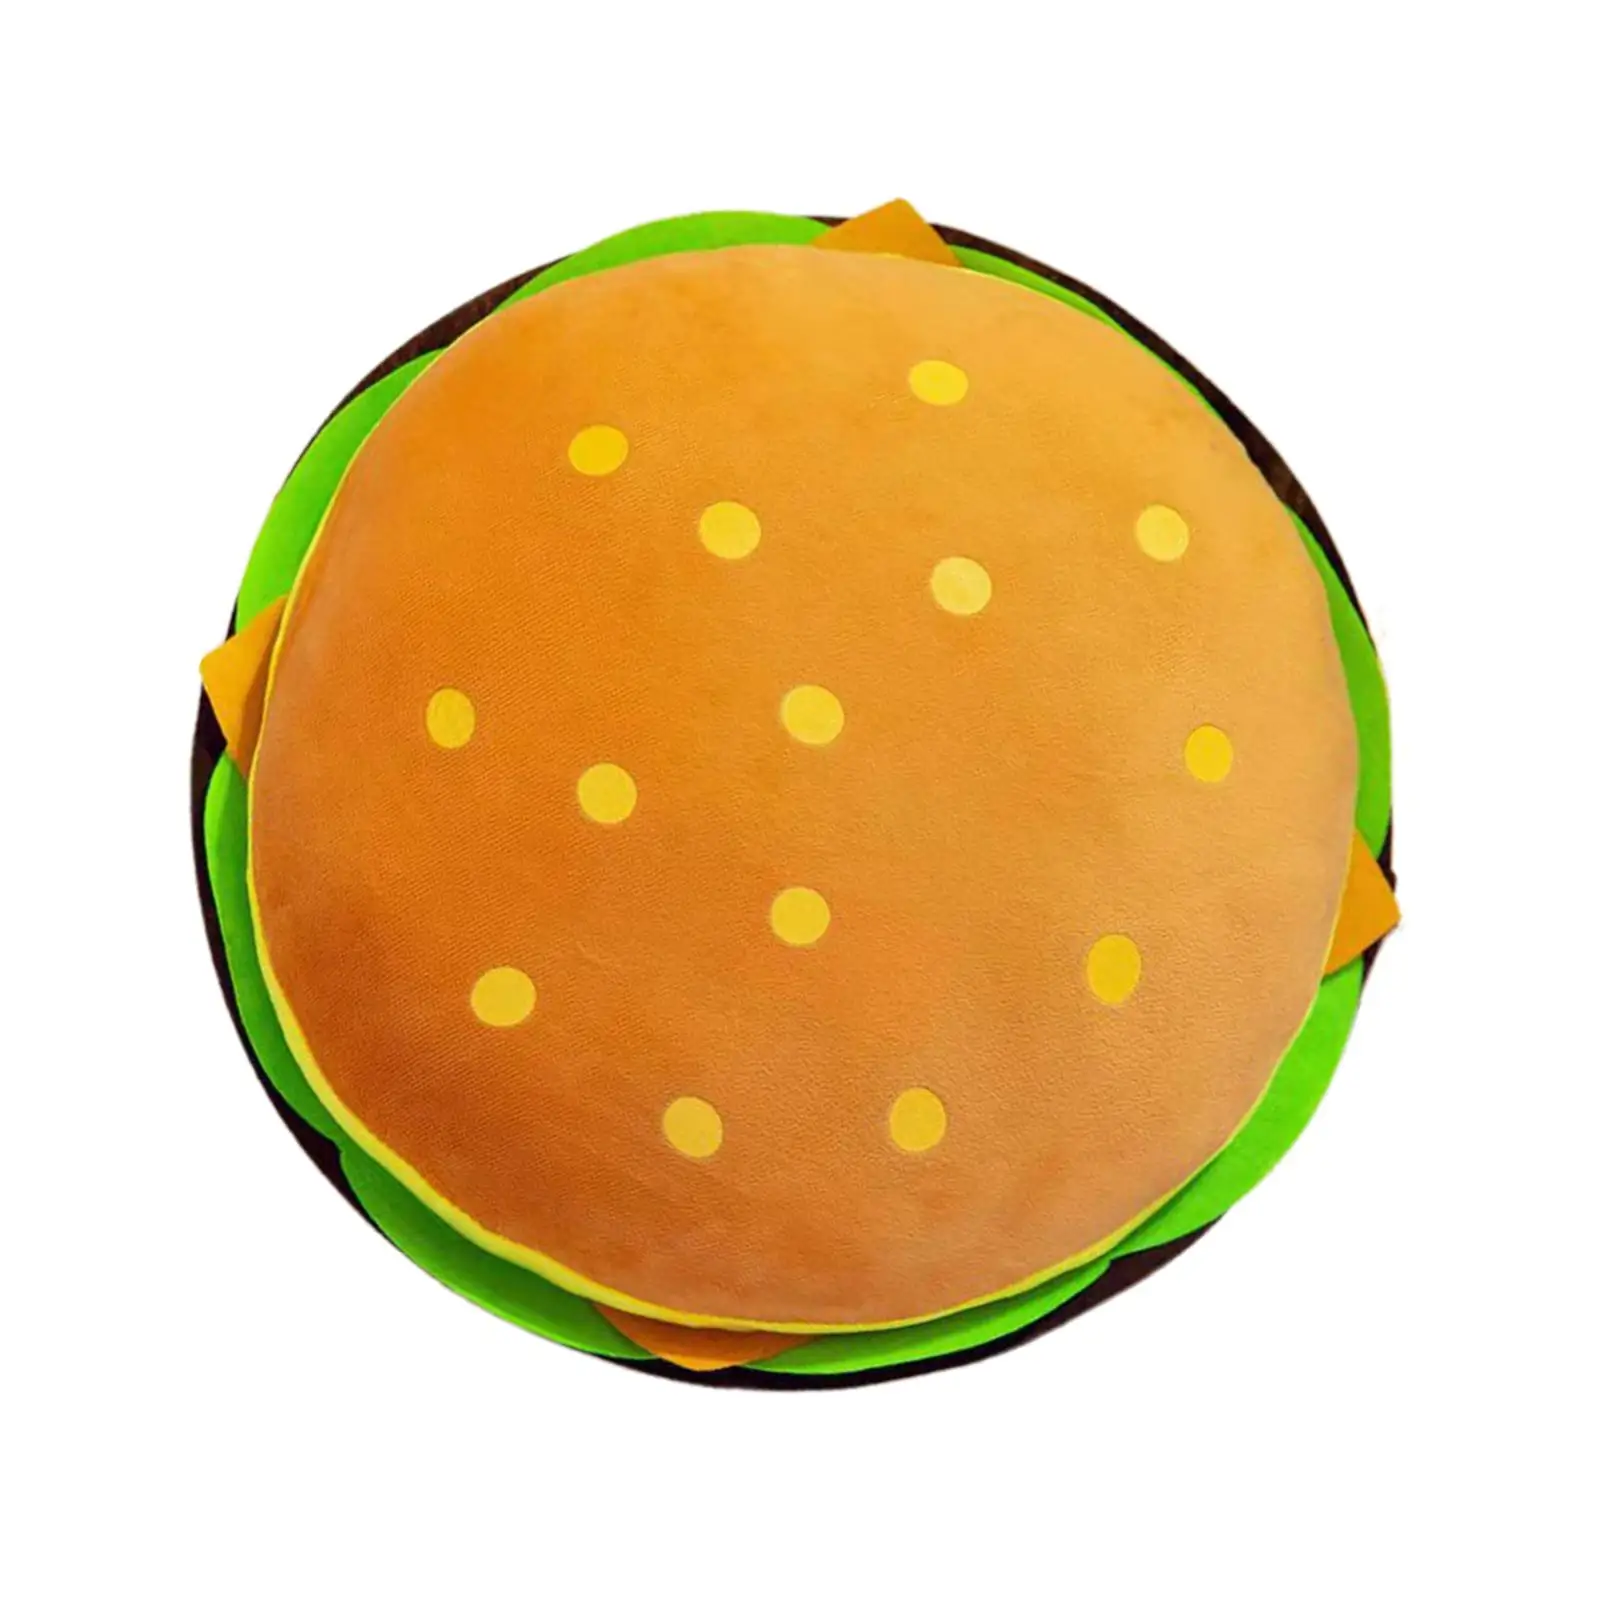 Cheeseburger Plush Toy Cushion Hugging Toy Livingroom Home Soft Photo Prop Hamburger Stuffed Pillow for Working Bedding Child